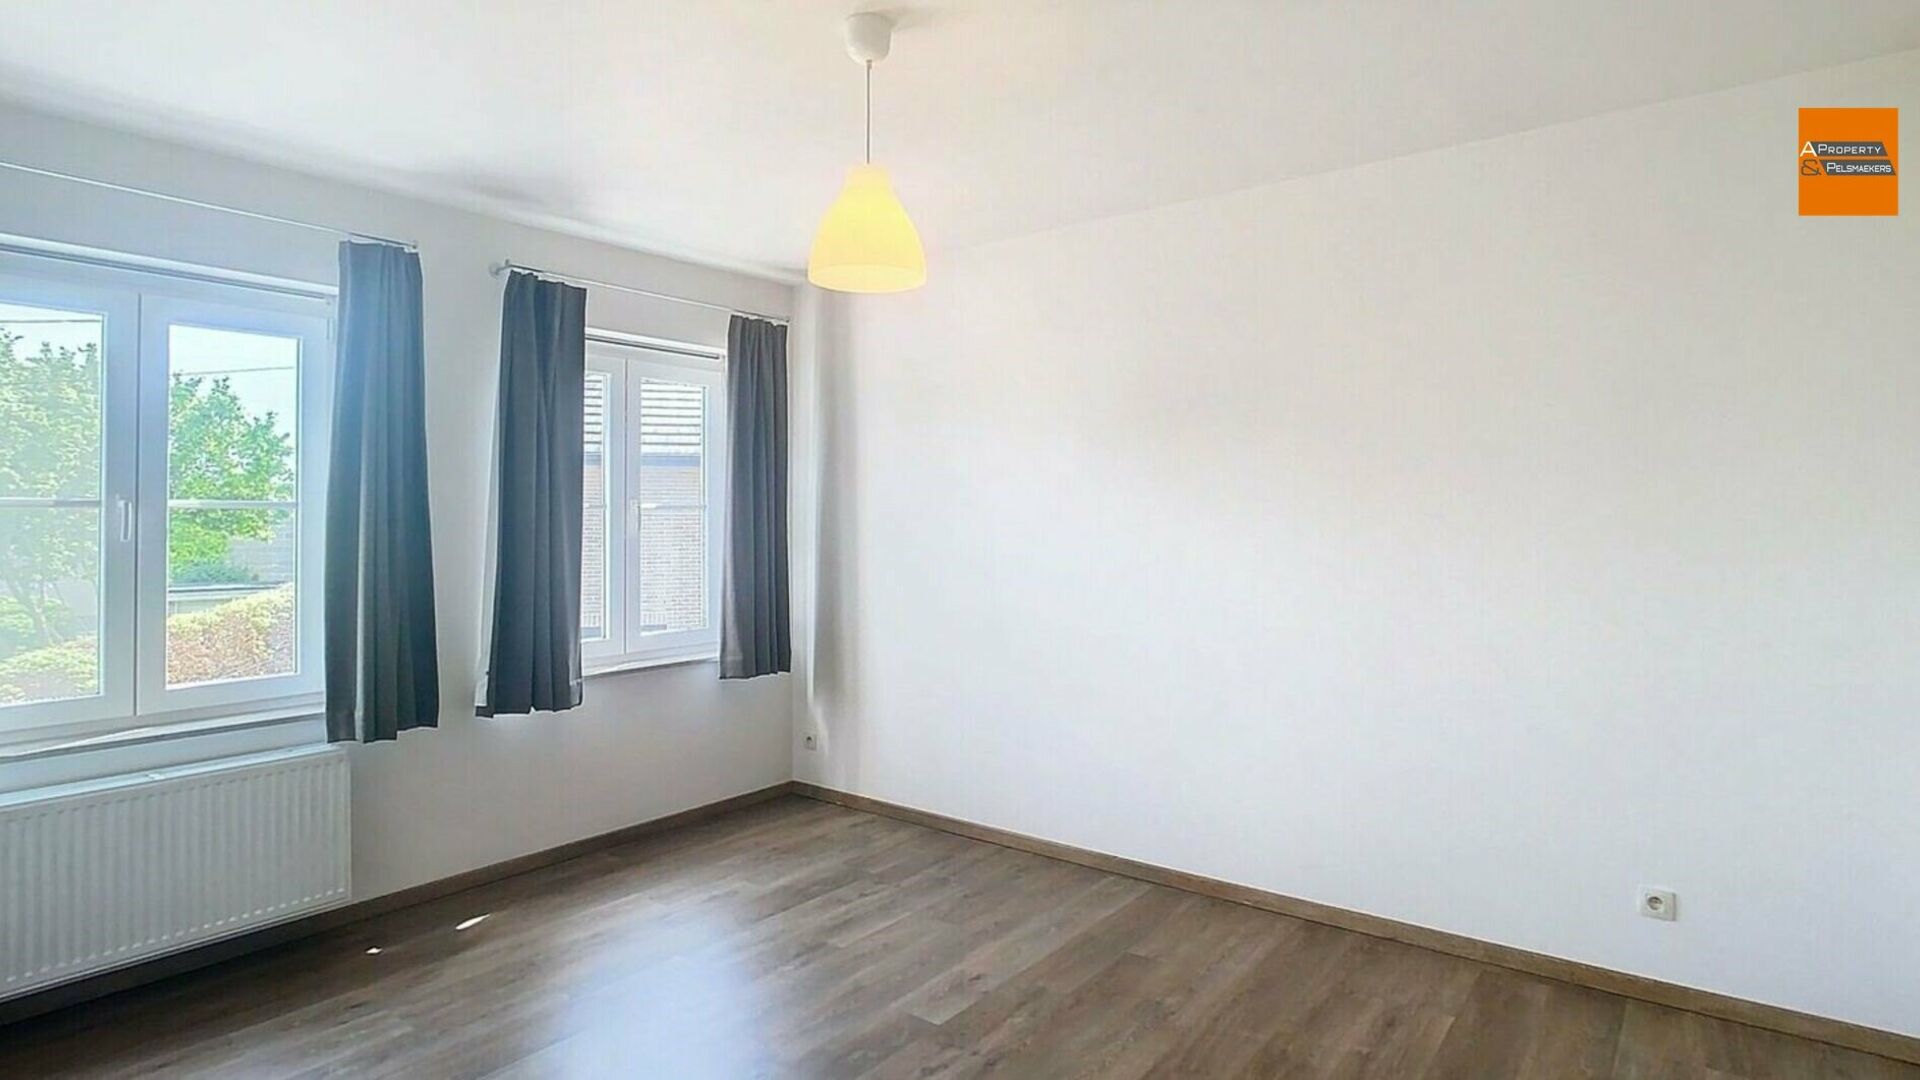 House for rent in DUISBURG